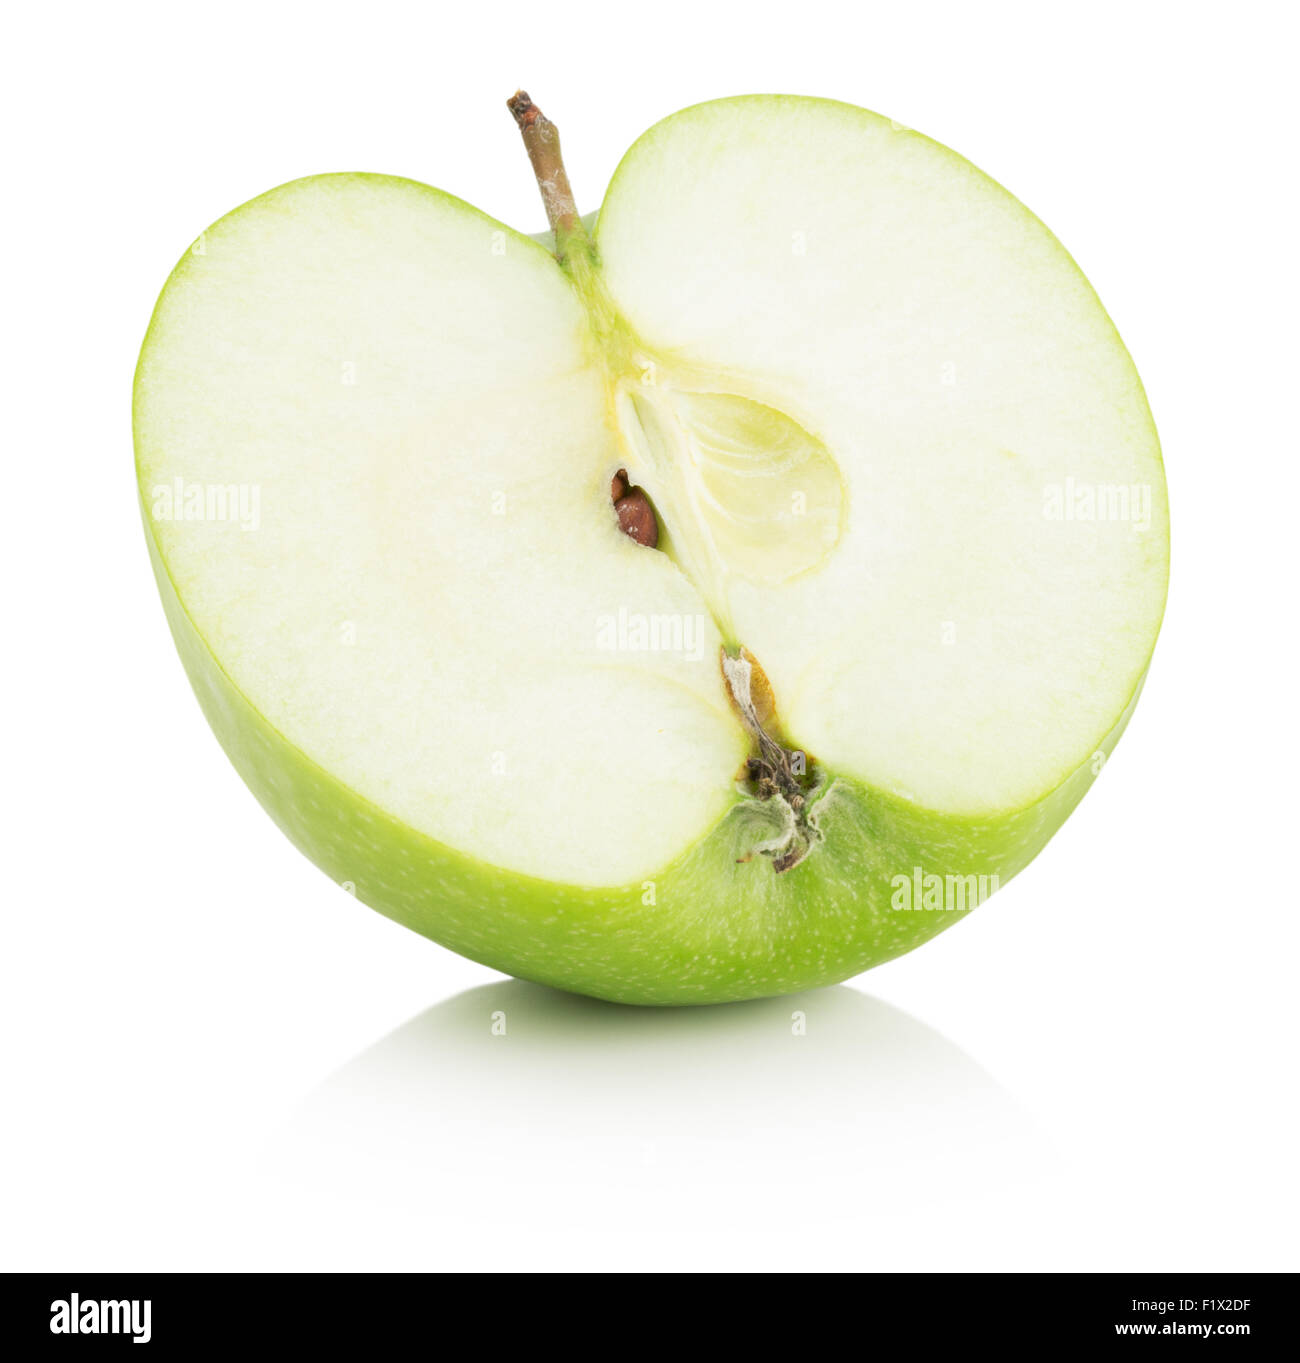 half of green apple isolated on a white background. Stock Photo